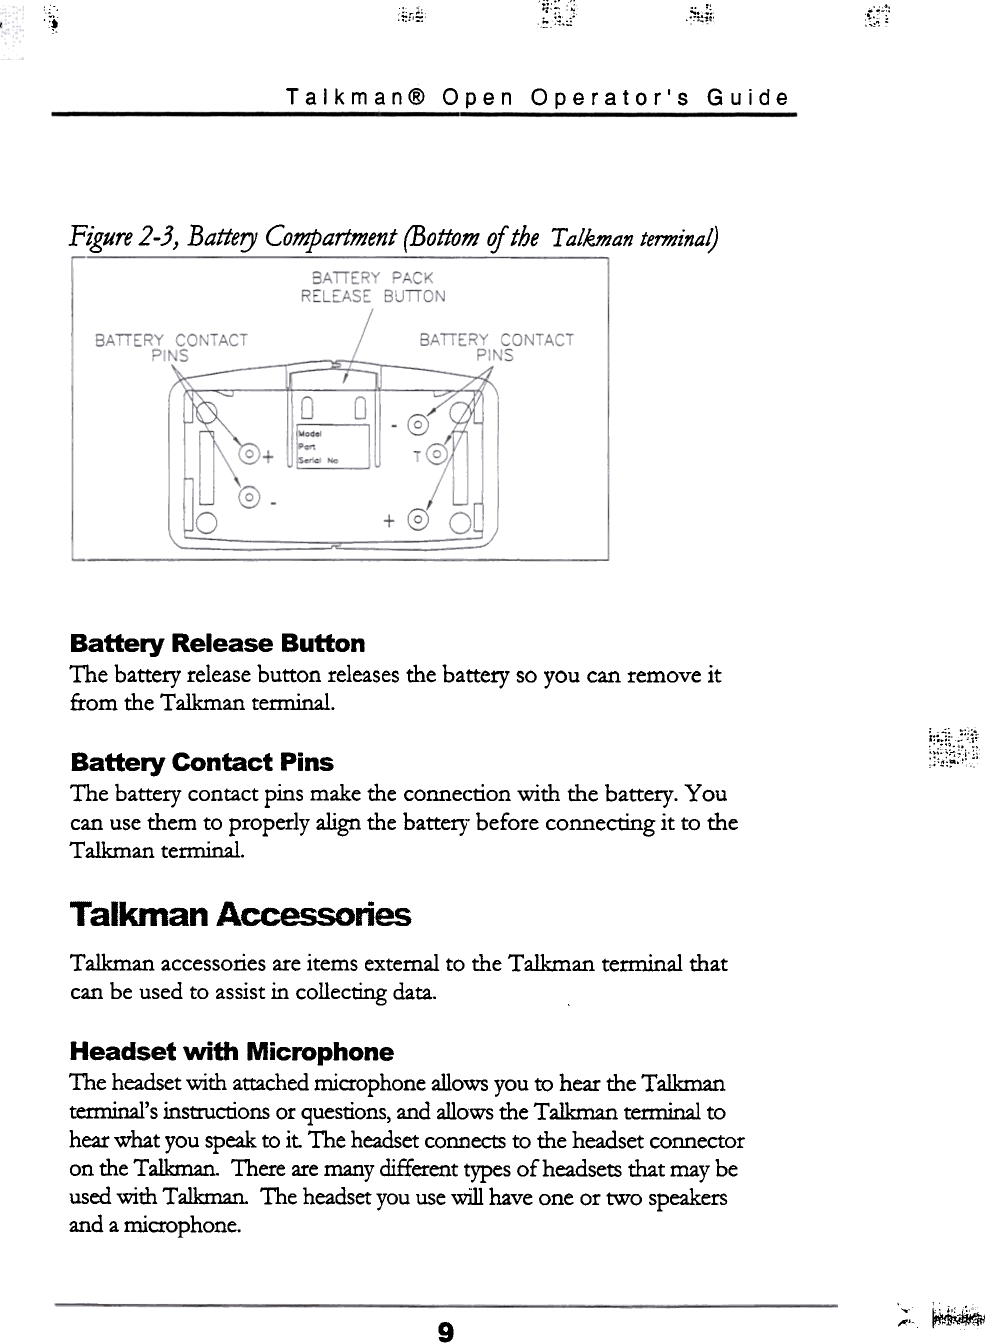 .~~.~~ ~;:€i. &apos;0tr;o.1 ~,,;:Talkman@  Open  Operator&apos;s  GuideFigure  2-3}  Battery  Compartment  (Bottom  of the  T alkman termina~Battery  Release  ButtonThe  battery release button  releases the battery  so you can remove  itfrom  the Talkman  tenninal..&quot;c..r~~~~\\;;;;Battery  Contact  PinsThe  battery  contact pins make the connection  with  the battery.  Youcan use them  to properly  align the battef}&quot; before  connecting  it  to  theT alkman terminal.T  alkman  AccessoliesTalkman  accessories are items external to the Talkman  terminal  thatcan be used to assist in  collecting  data.Headset  with  MicrophoneThe headset with  attached microphone allows you to hear the Talkmantemrinal&apos;s instrucrions or questions, and allows the Talkman  terminal  tohear what you speak to it. The headset connects to the headset connectoron the Talkman.  There are many different types of headsets that may beused with  Talkman.  The headset you use will  have one or two  speakersand a microphone.;,c~9